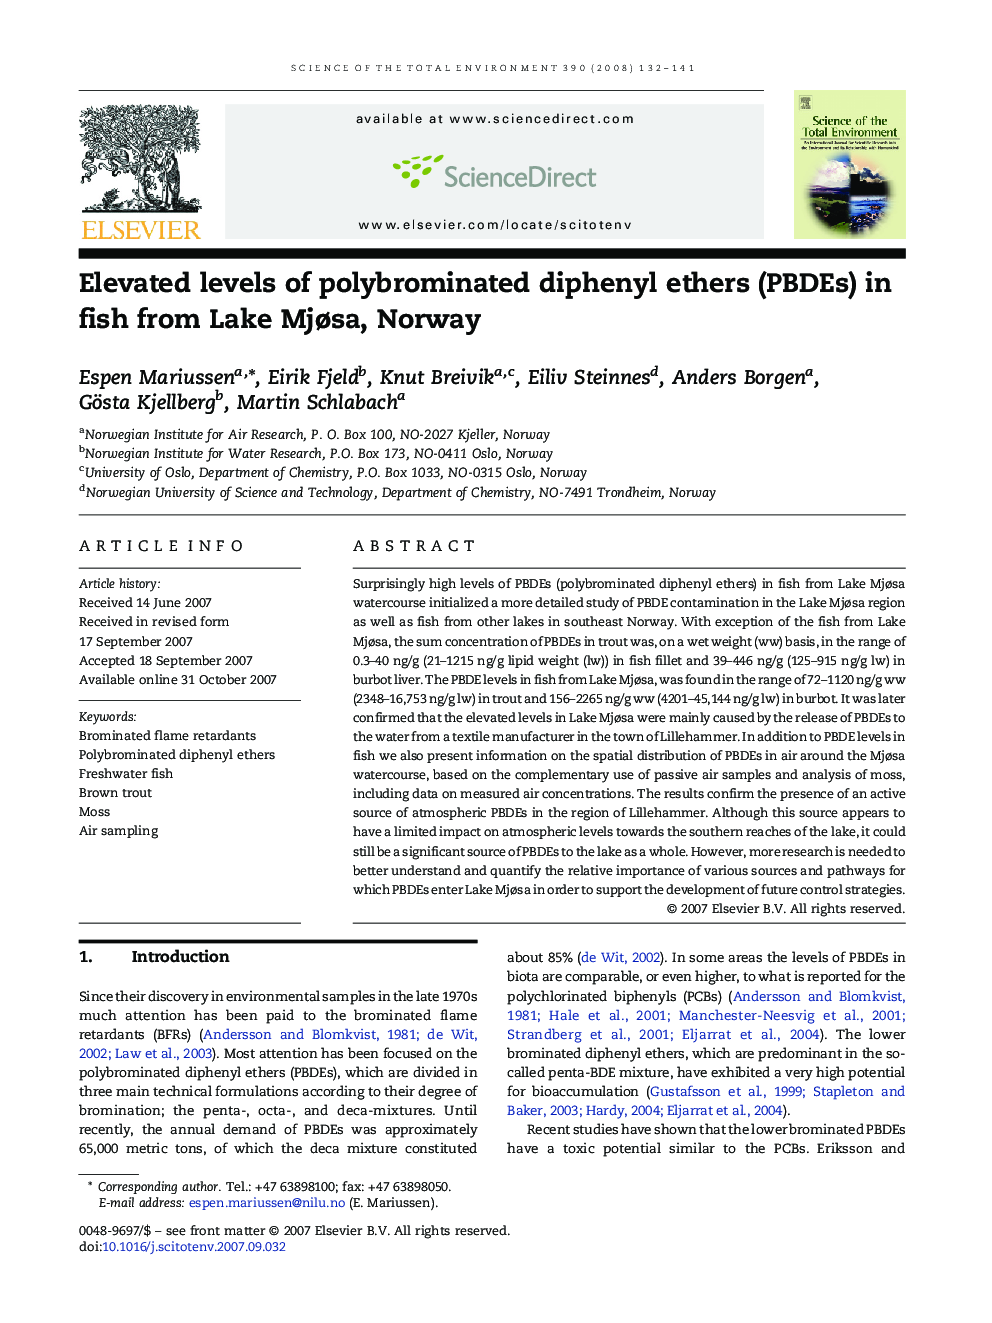 Elevated levels of polybrominated diphenyl ethers (PBDEs) in fish from Lake Mjøsa, Norway